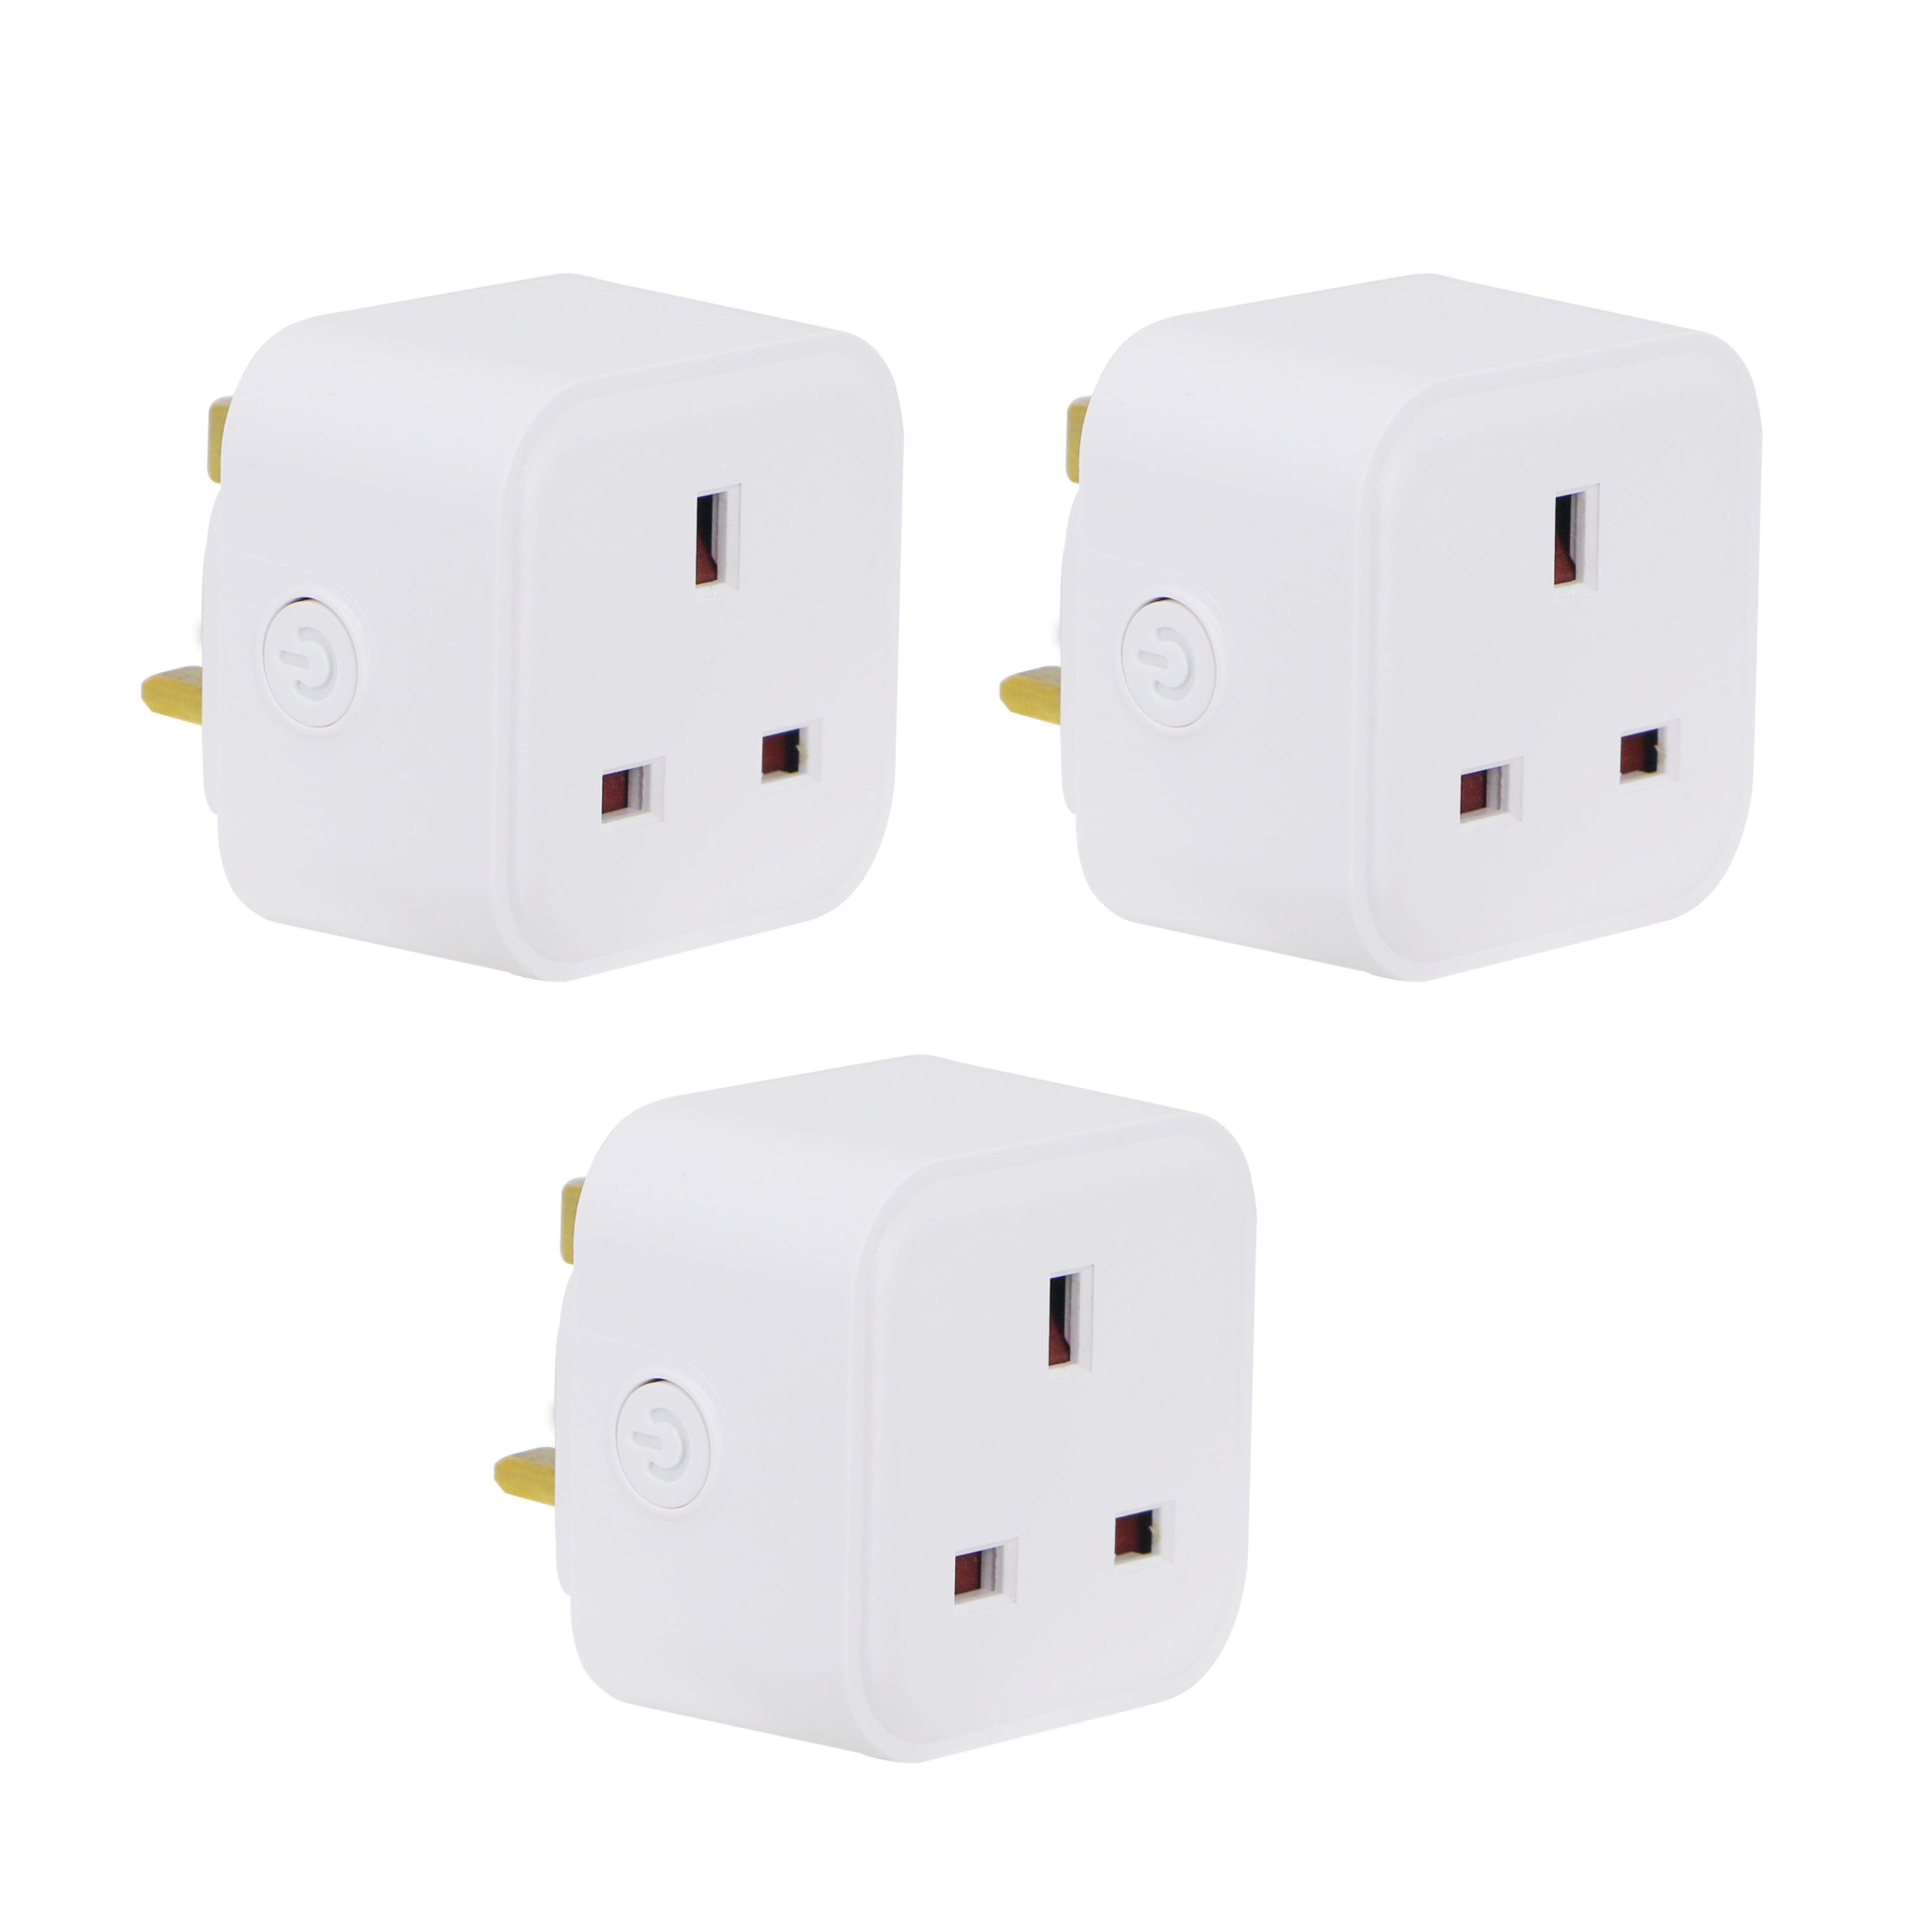 3 Pc Pack Mini WiFi Smart Plug, UK BS Plug, Smart Socket Works with Amazon Alexa & Google Home, With Energy Monitoring, APP & Voice Control